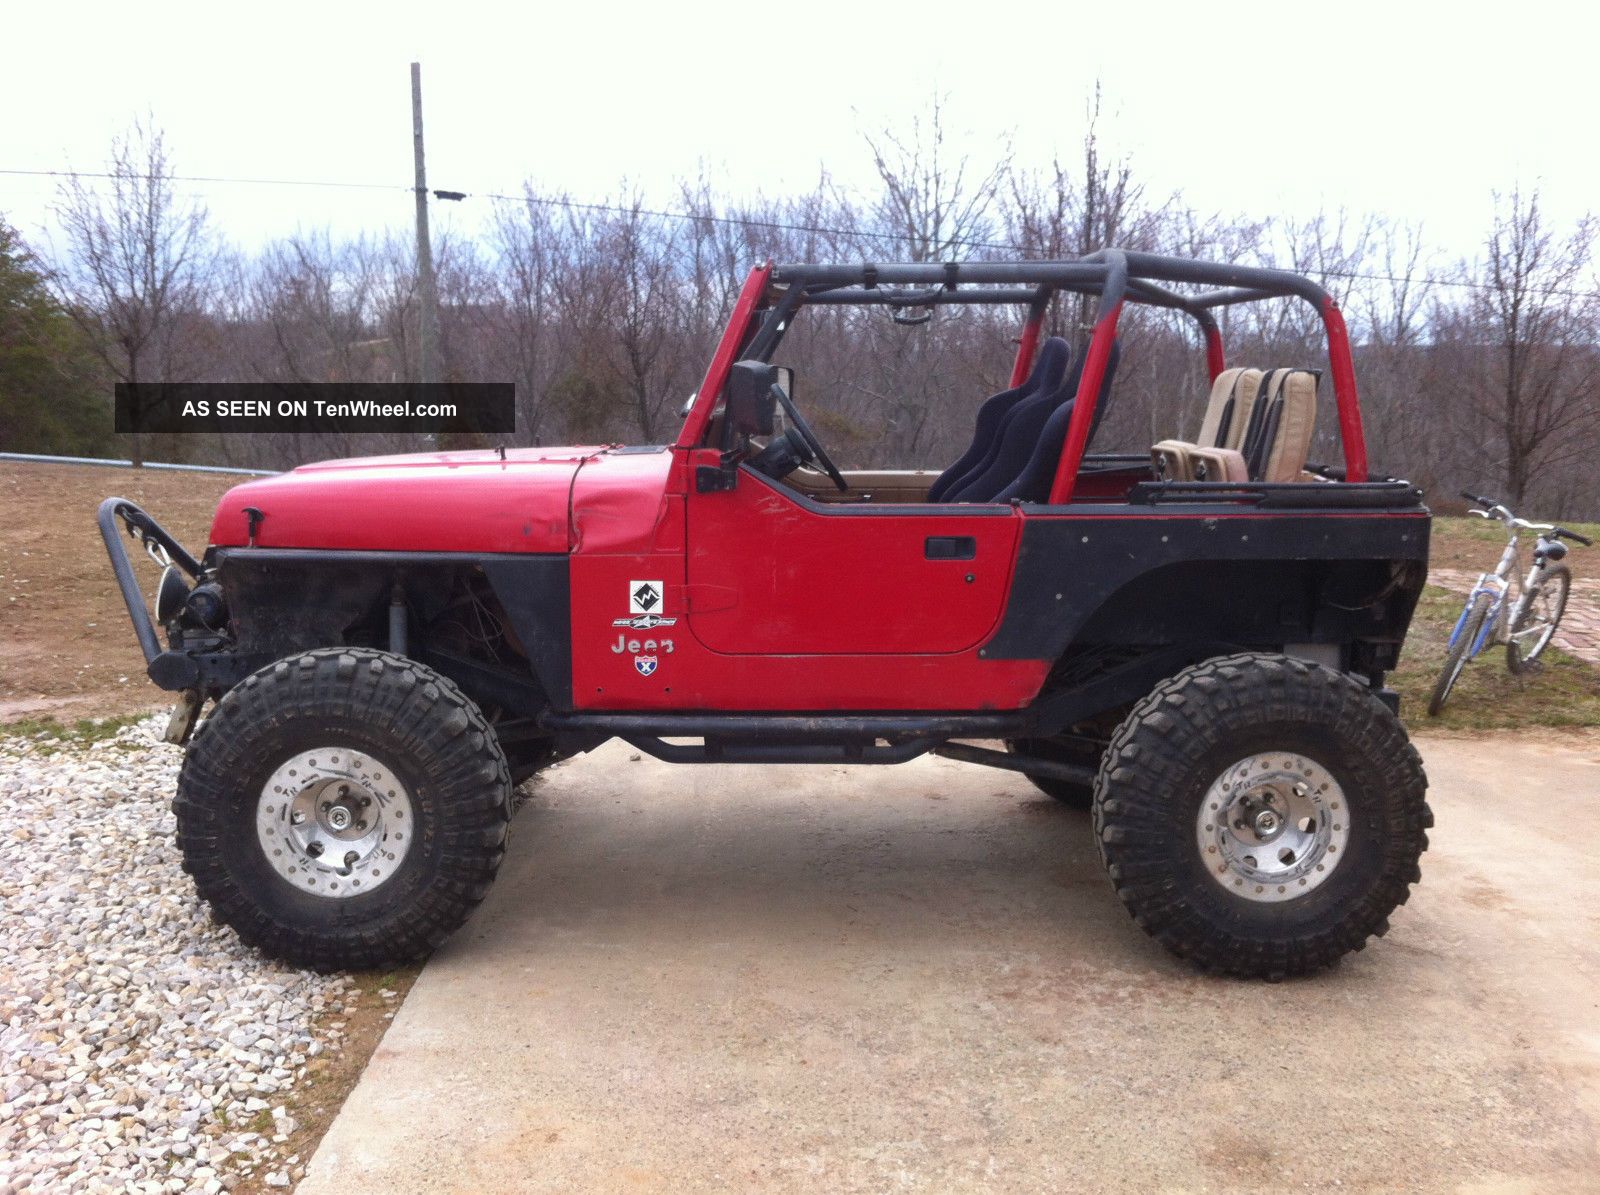 1994 Jeep wrangler yj owners manual